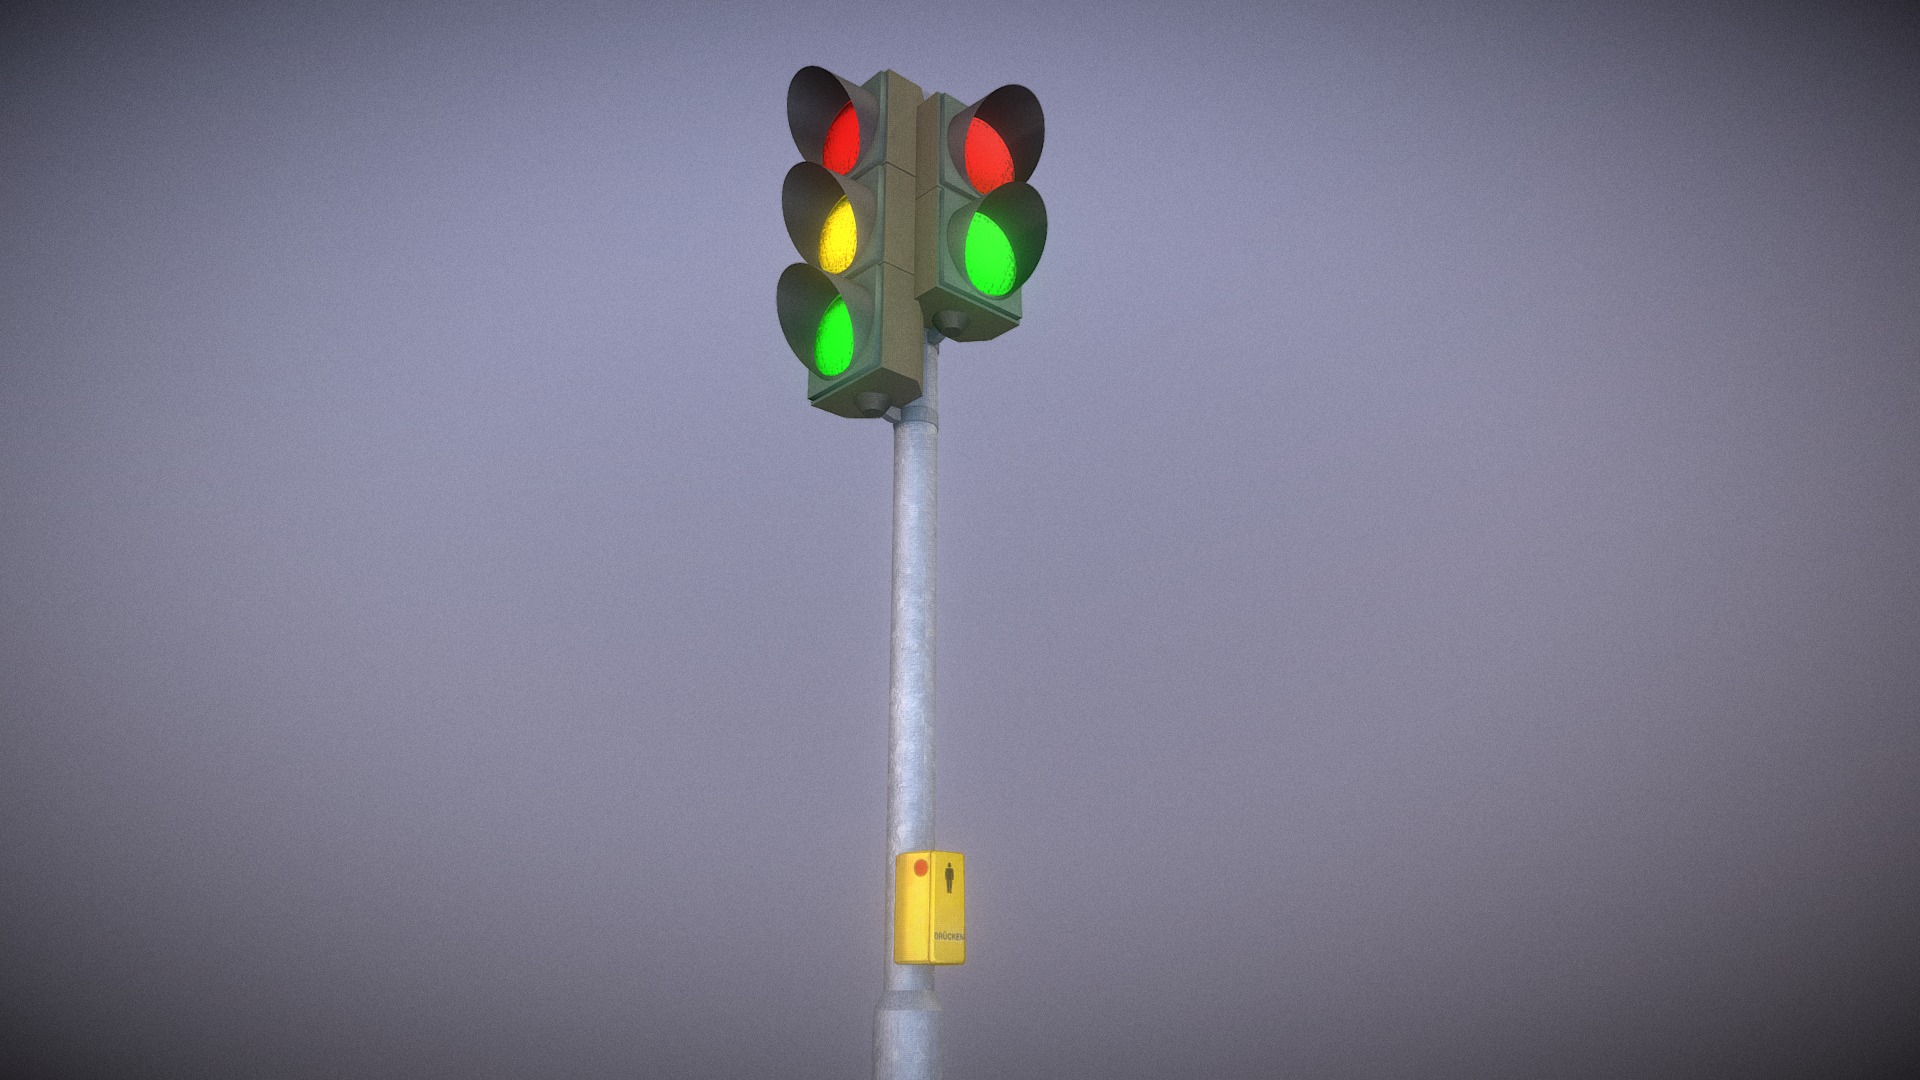 3D model Ampel (ohne Animation) - This is a 3D model of the Ampel (ohne Animation). The 3D model is about a traffic light with green.